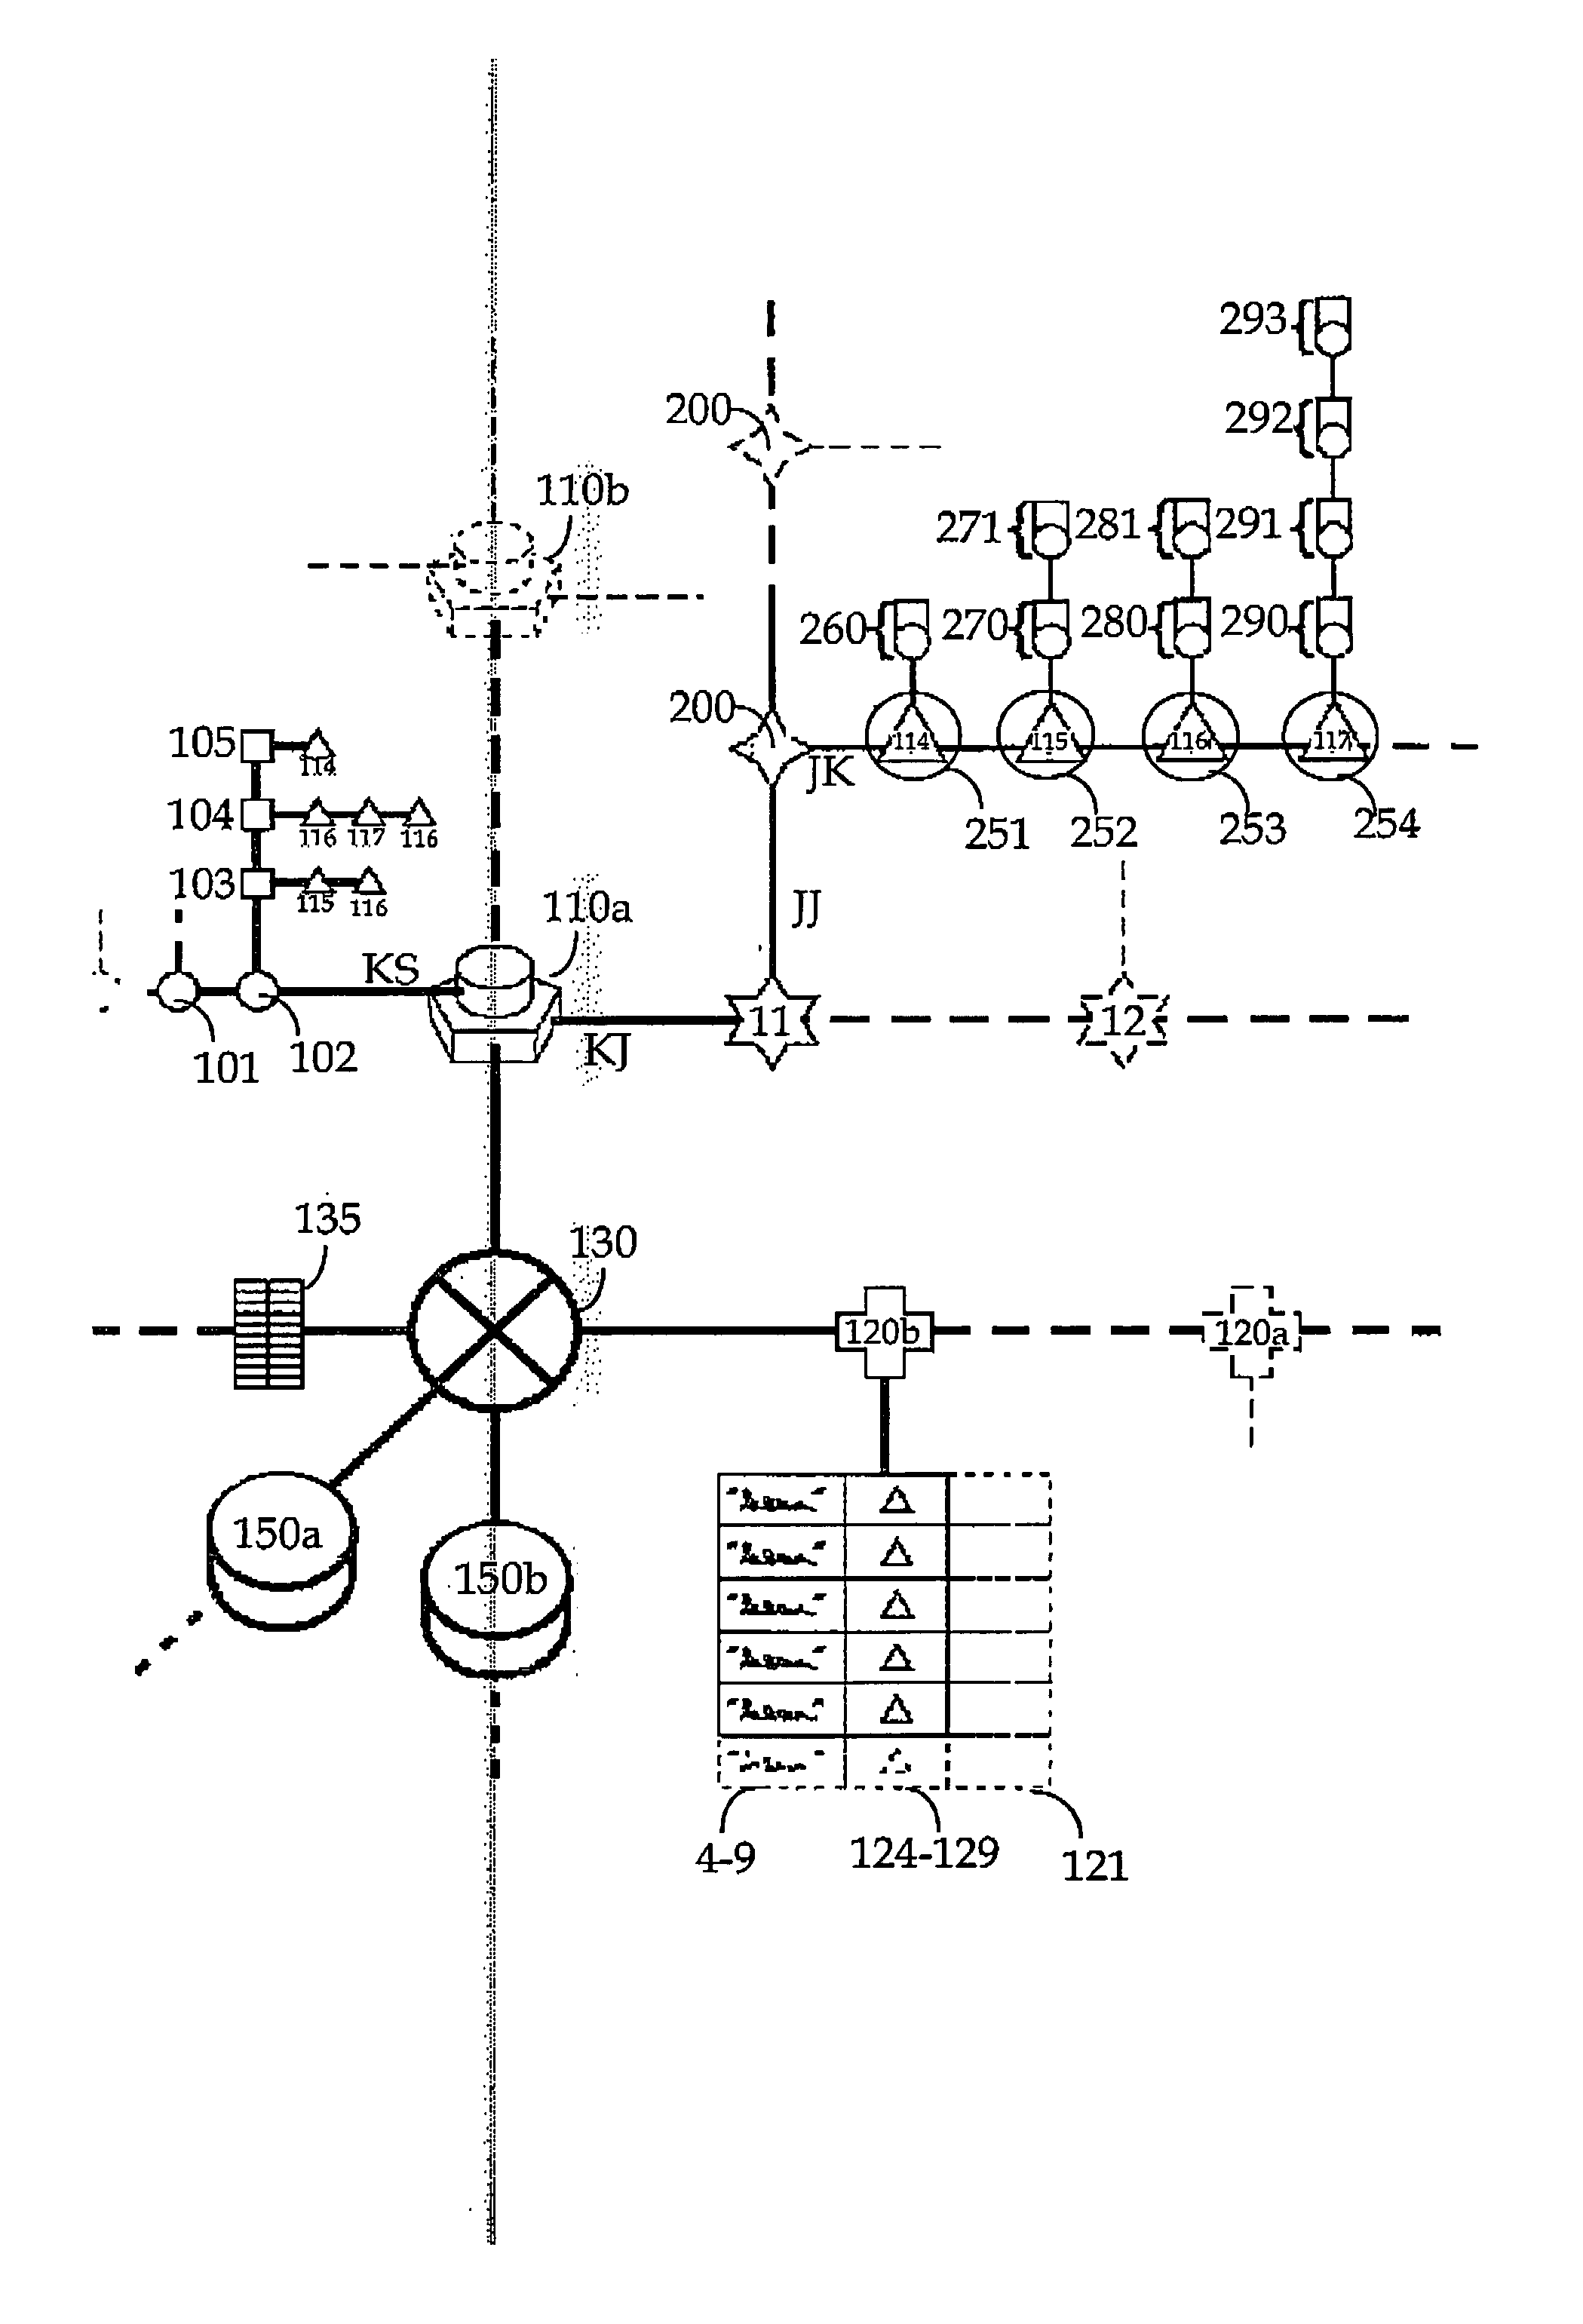 Forming of a data retrieval, searching from a data retrieval system, and a data retrieval system